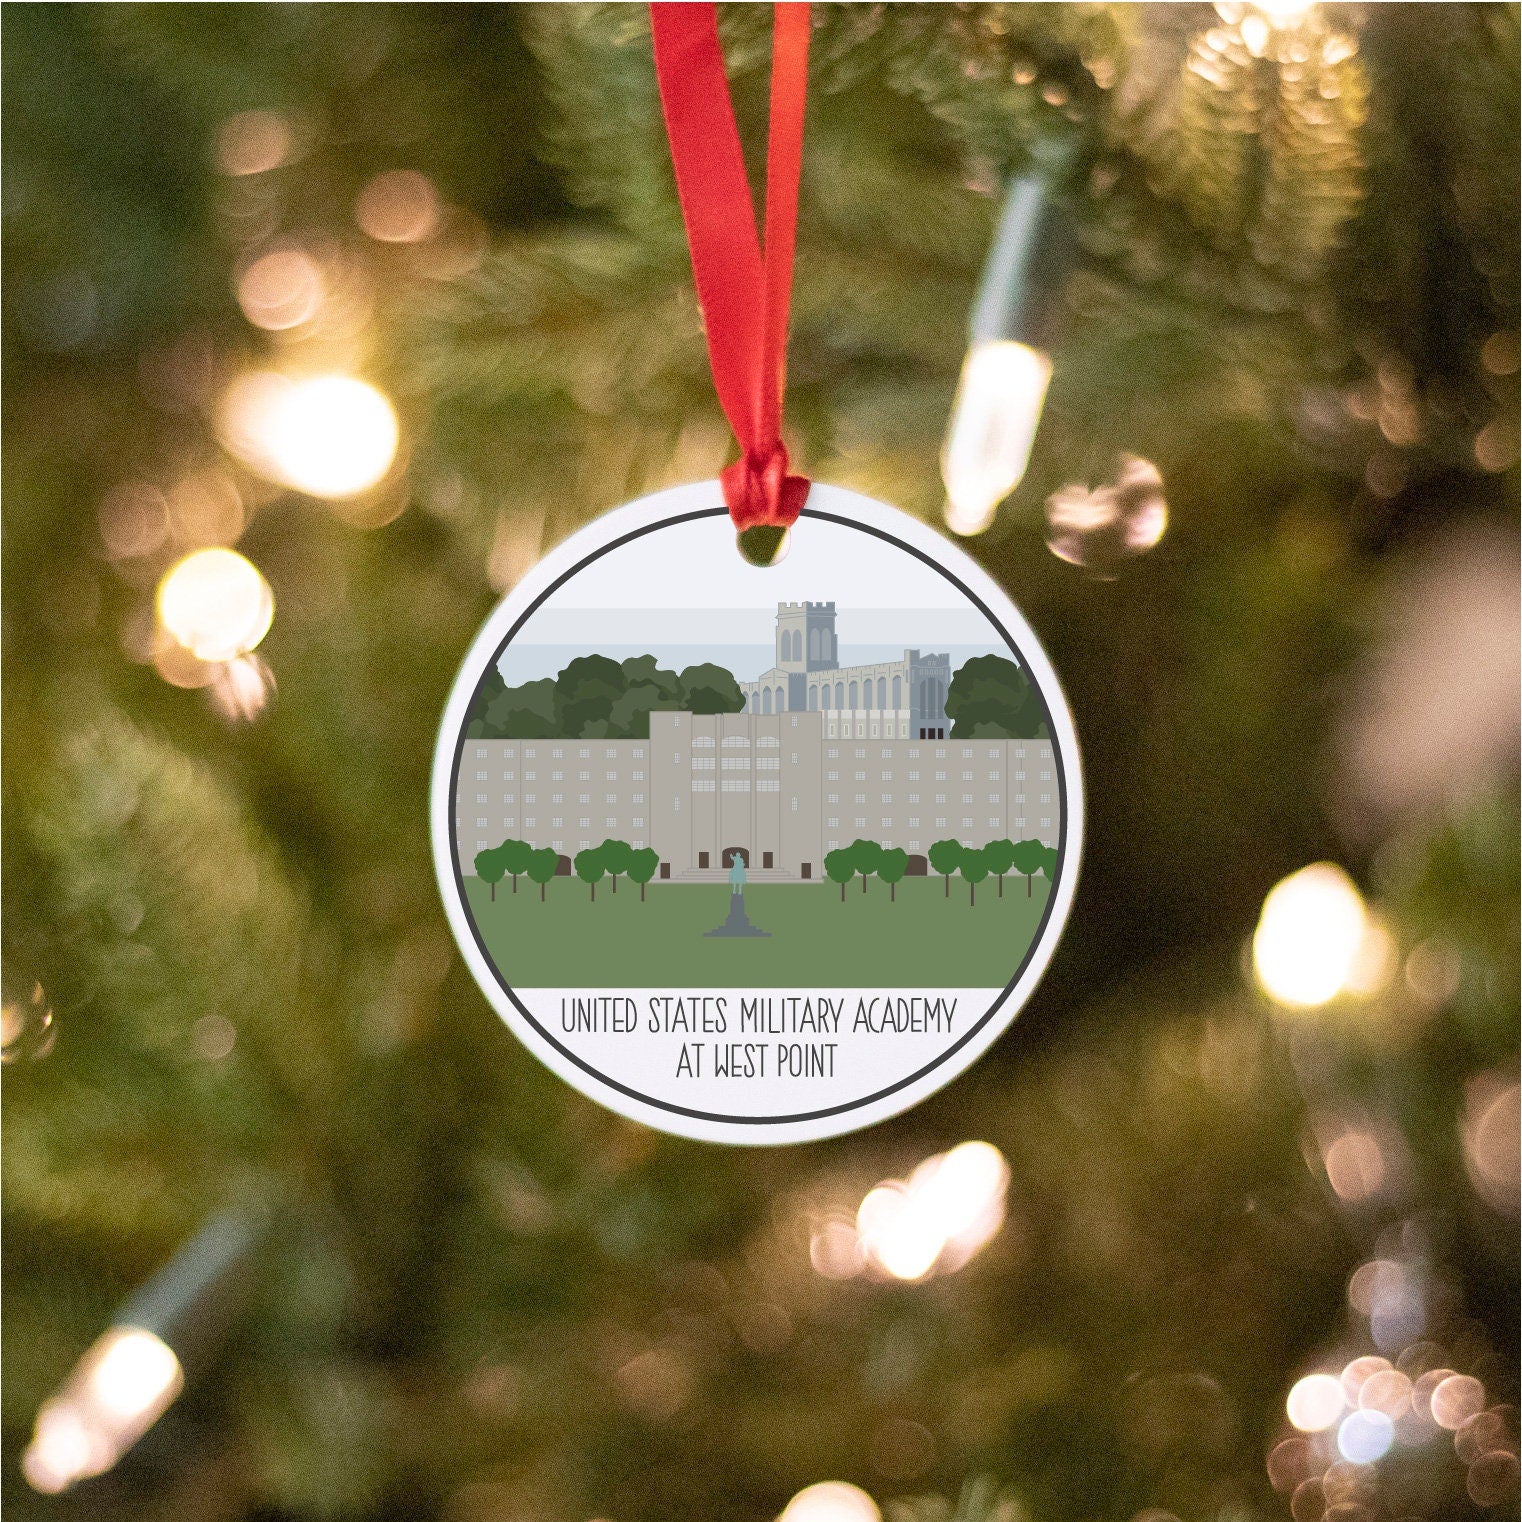 united states military academy at west point ornament